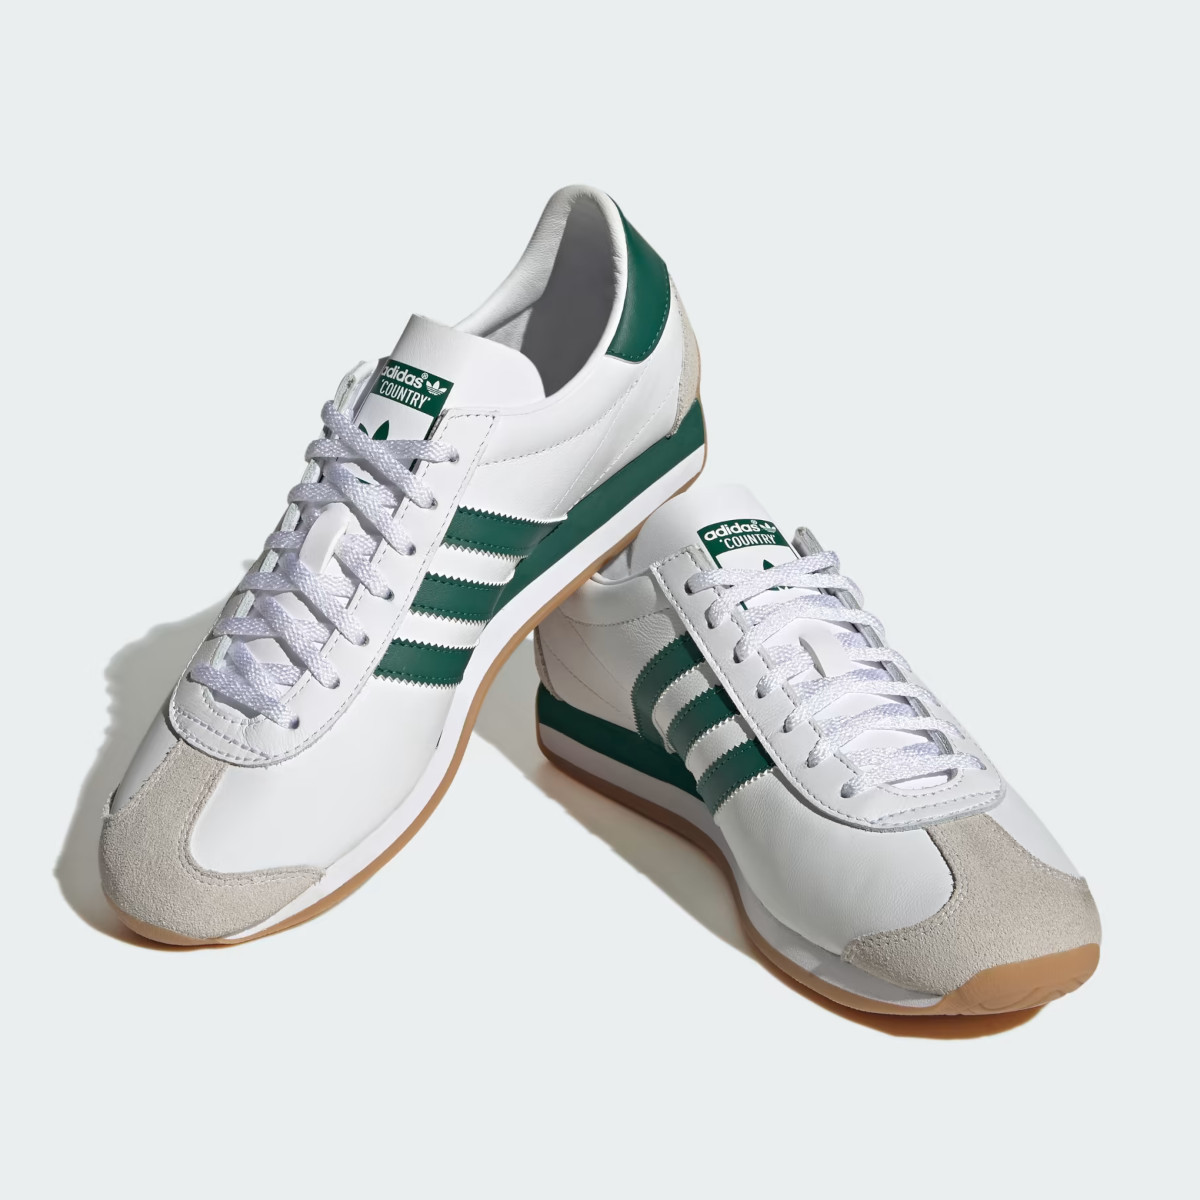 adidas Country OG White Collegiate Green IF2856 4